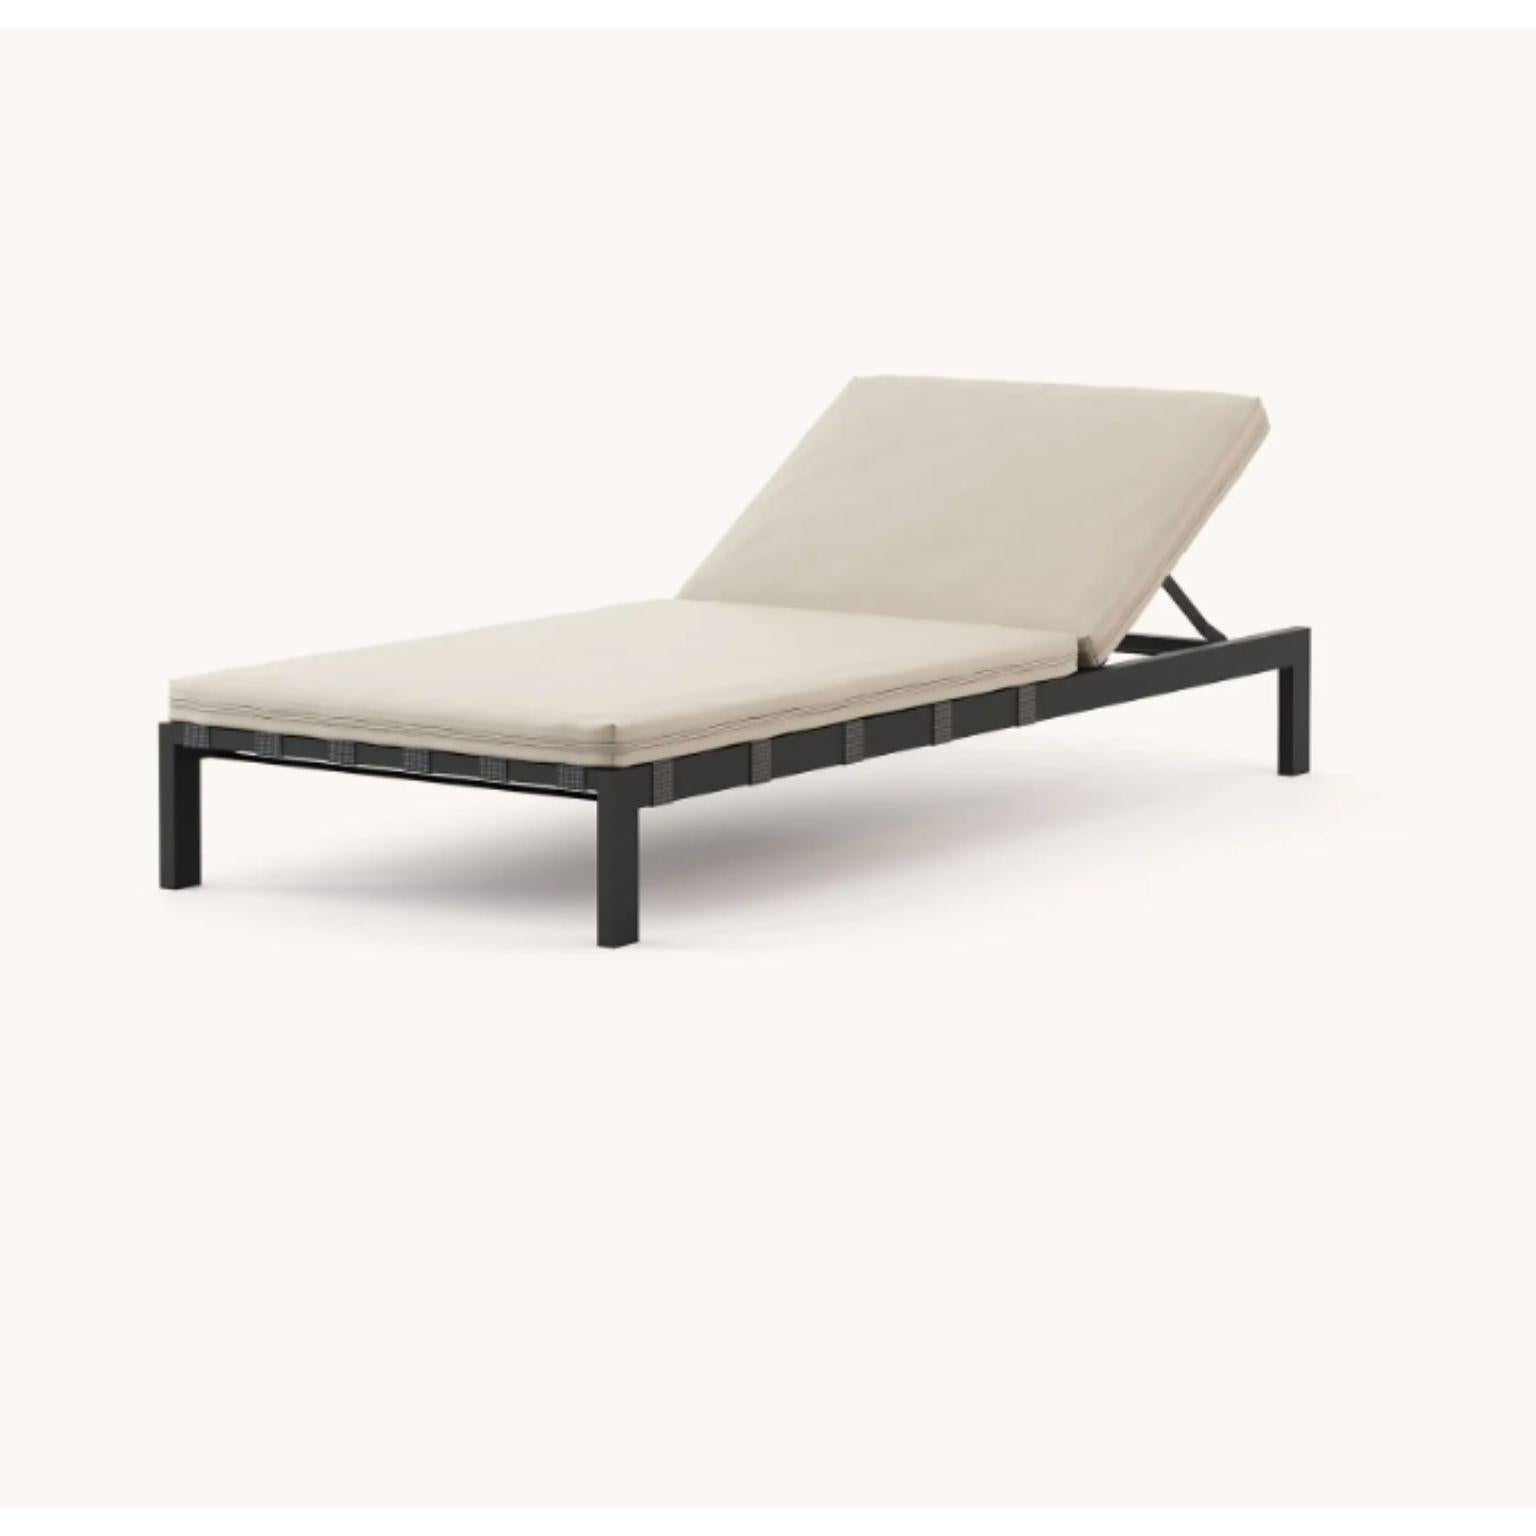 Bondi lounger by Domkapa
Materials: black texturized steel, fabric (Nile Ivory).
Dimensions: W 200 x D 81 x H 31.5 cm.
Also available in different materials.

Enjoy your outdoor space with Bondi Lounger and your summers will never be the same.